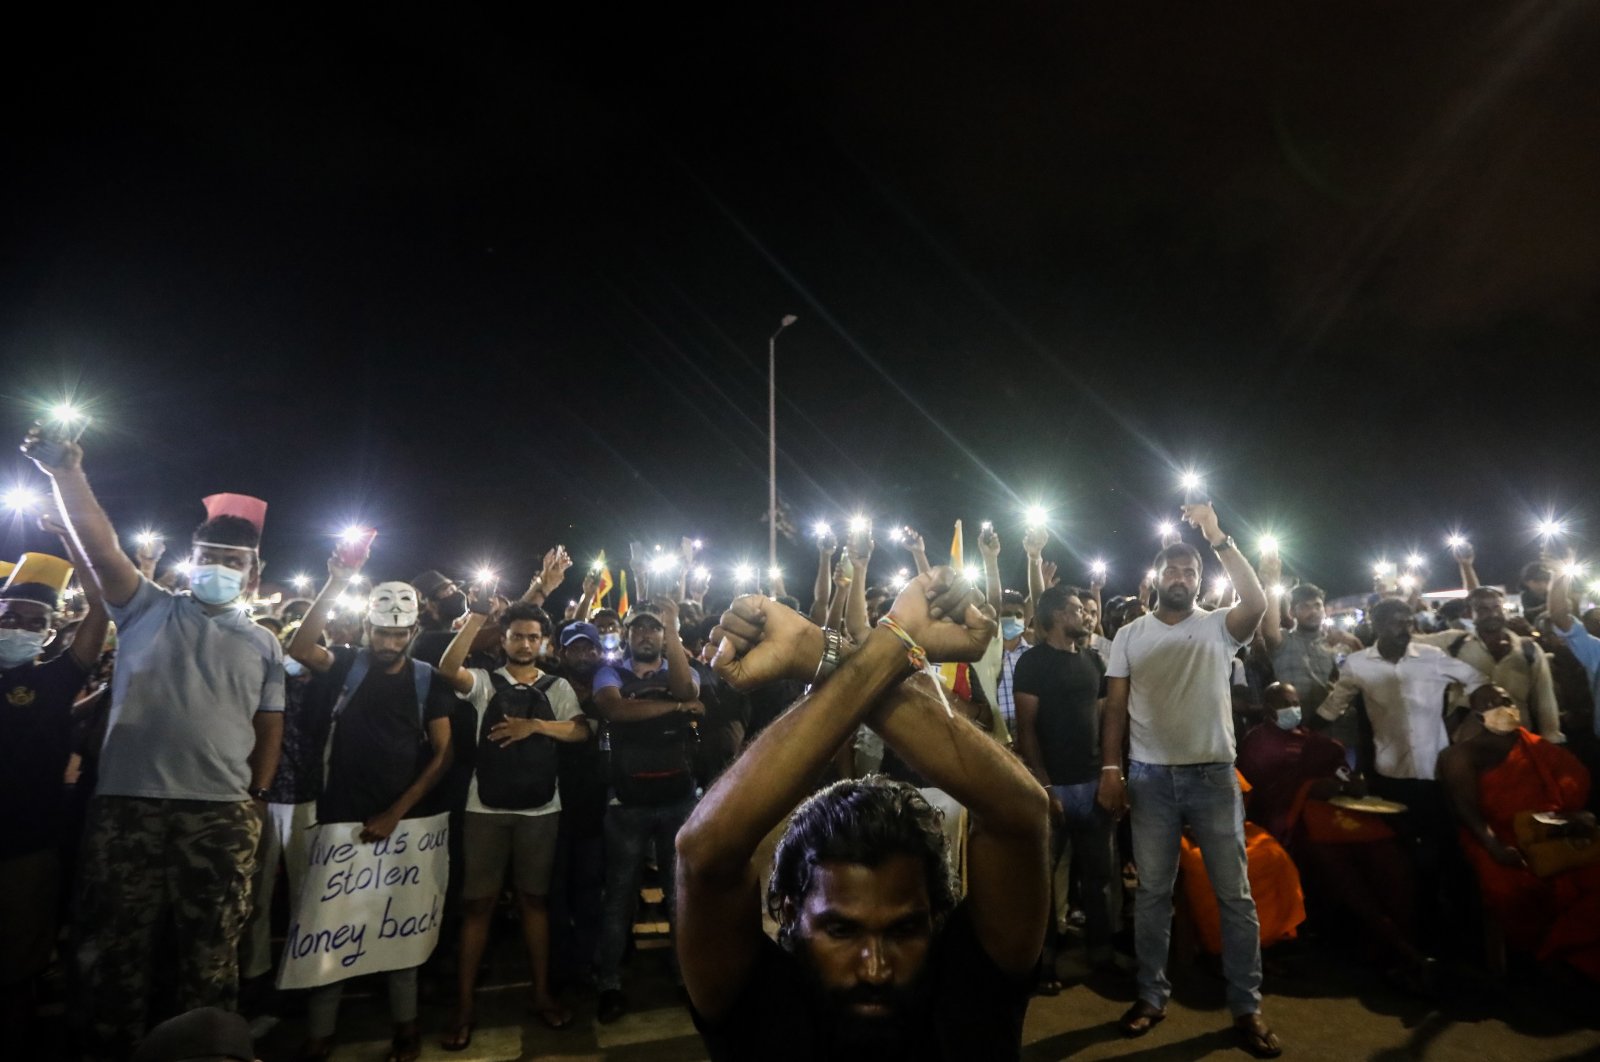 Protesters light their mobile phones’ flashlights in memory of the protester killed in a police shooting during the clash in Rambukkana, in front of the Presidential Secretariat in Colombo, Sri Lanka, April 19, 2022. (EPA Photo)